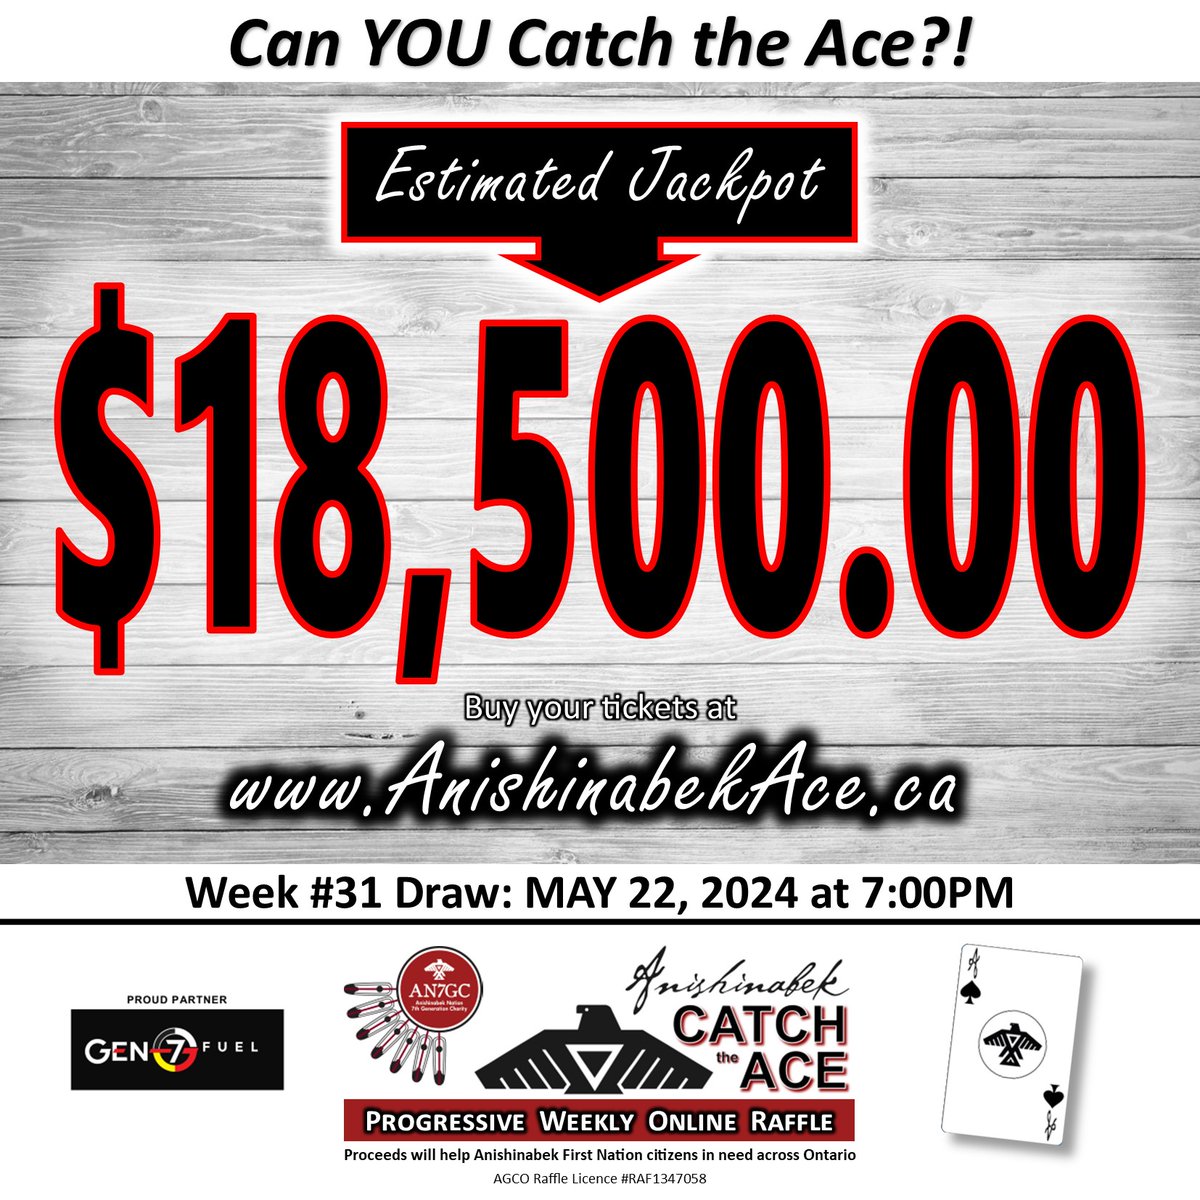 Support the Anishinabek Nation 7th Generation Charity by purchasing Catch the Ace tickets for your chance to win an estimated $18,500 jackpot! Purchase tickets now at anishinabekace.ca for the upcoming draw on Wednesday evening at 7pm.